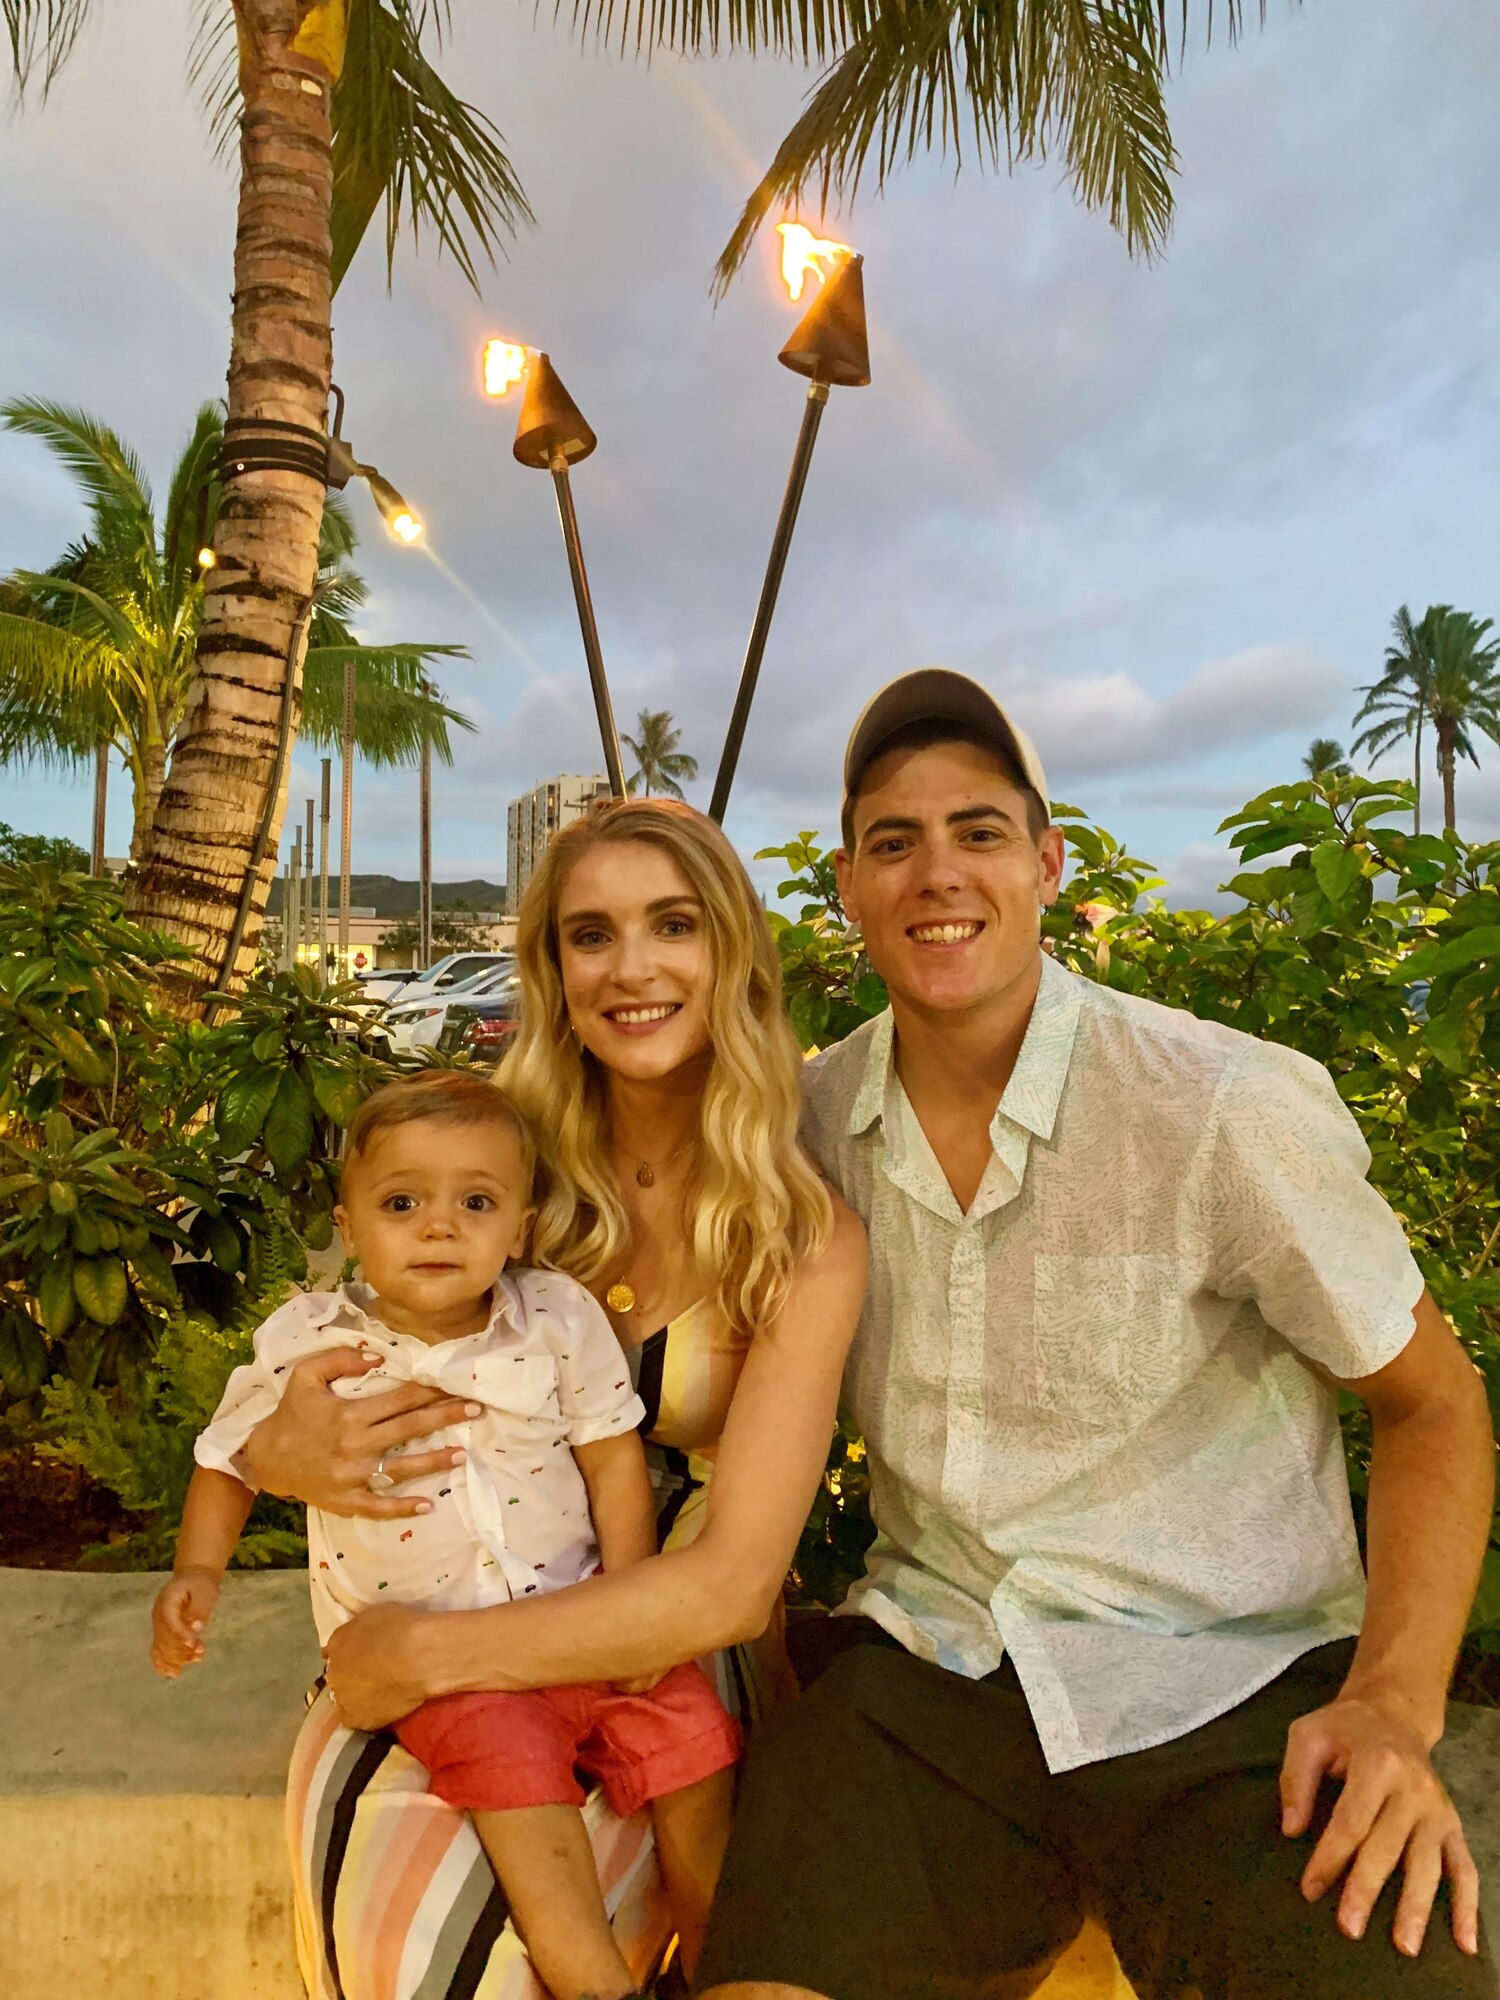 Captain Emily Barkemeyer and Captain Jared Barkemeyer enjoy living in Hawaii with their son.